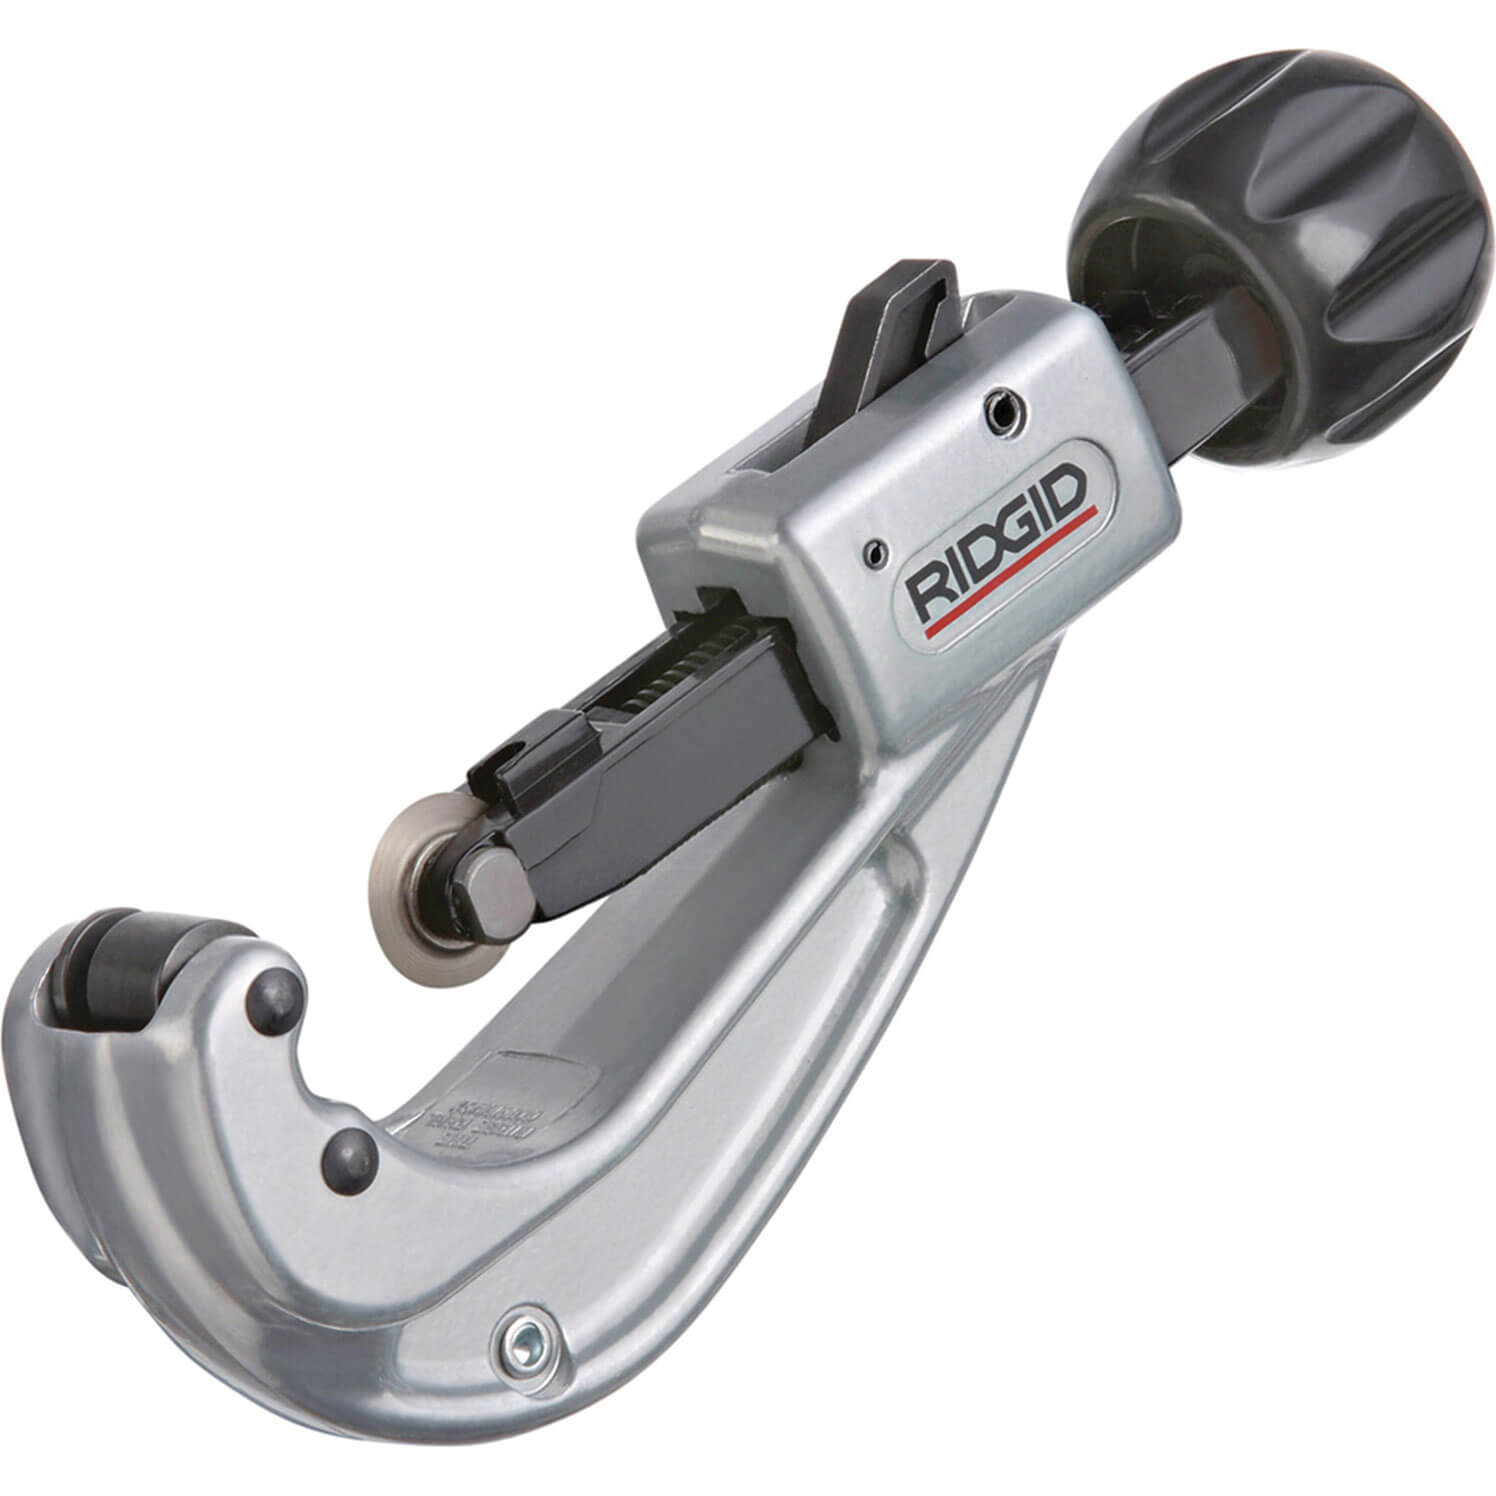 Image of Ridgid Quick Acting Adjustable Pipe Cutter for Metal and Plastic 6mm - 66mm